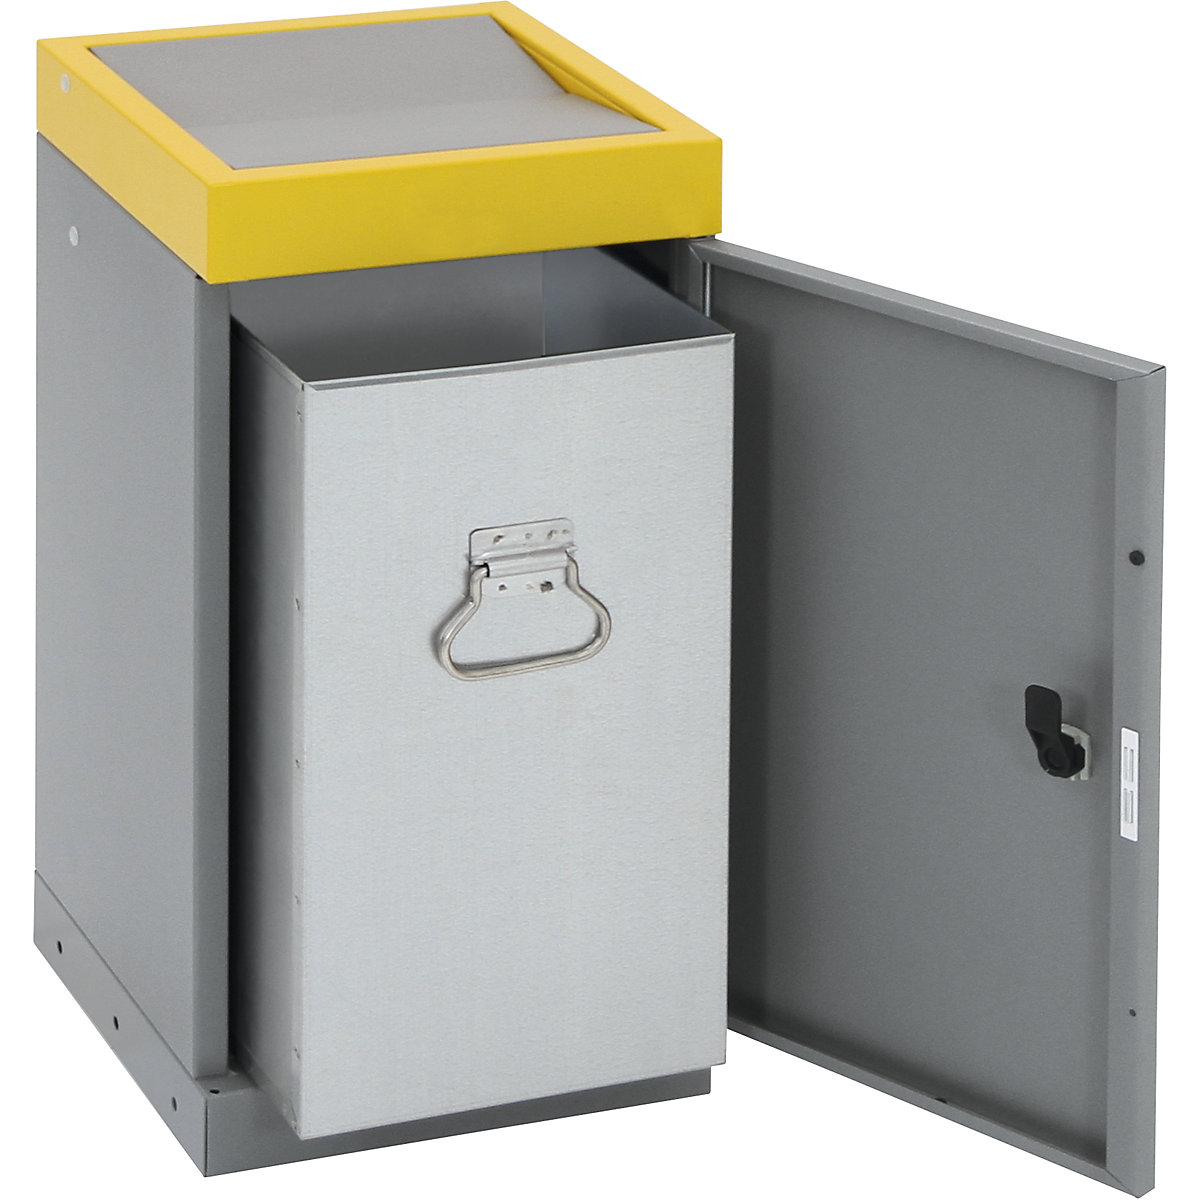 Recyclable waste collector with swing lid, individual unit, capacity 30 l, lid colour yellow / white aluminium-11